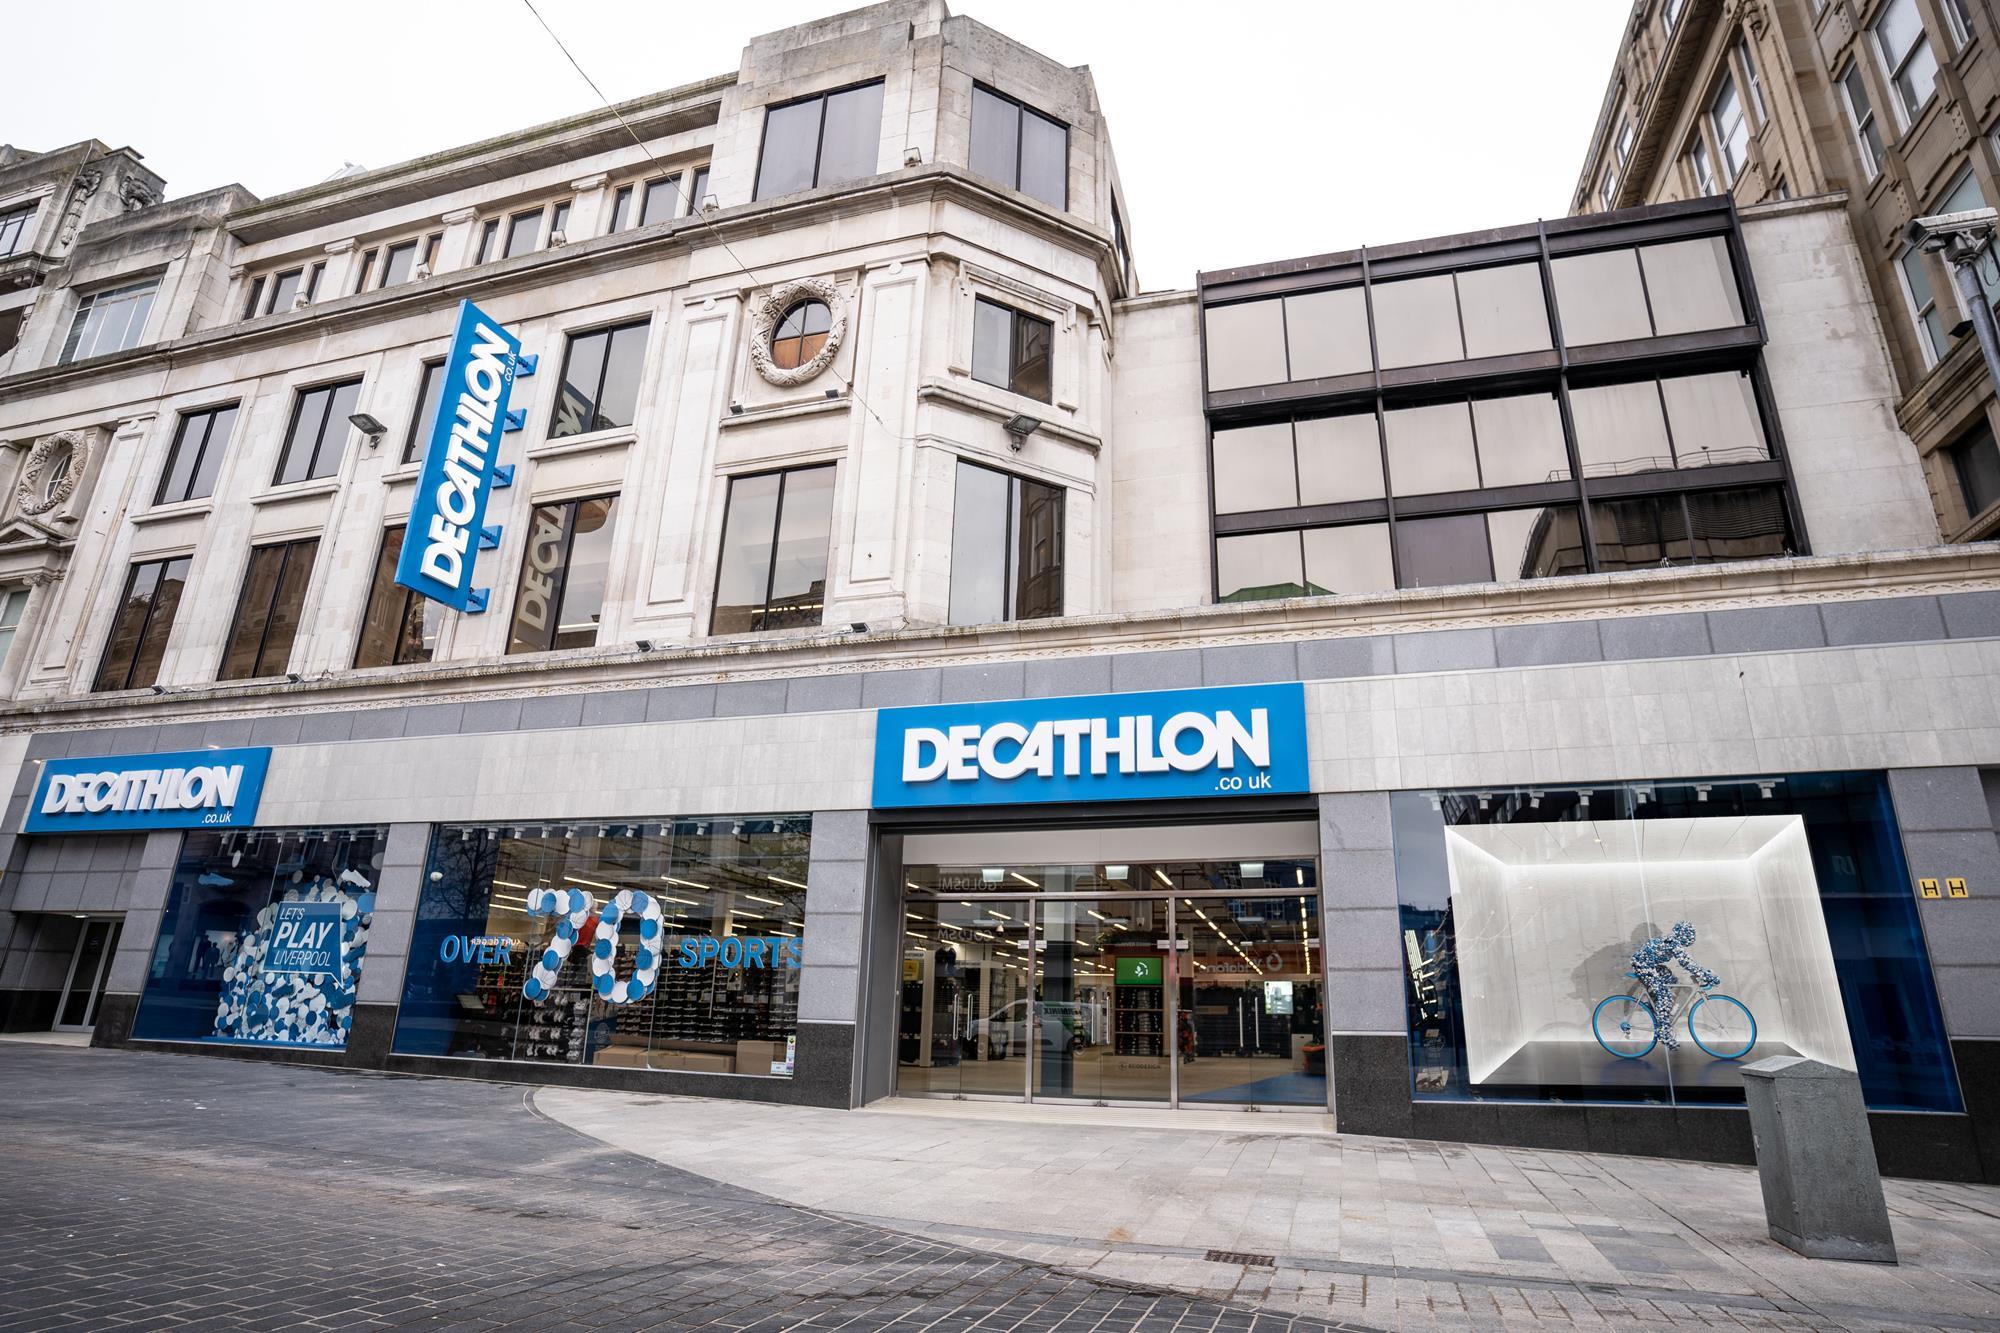 Decathlon's expansion fueled by accessibility » Strategy